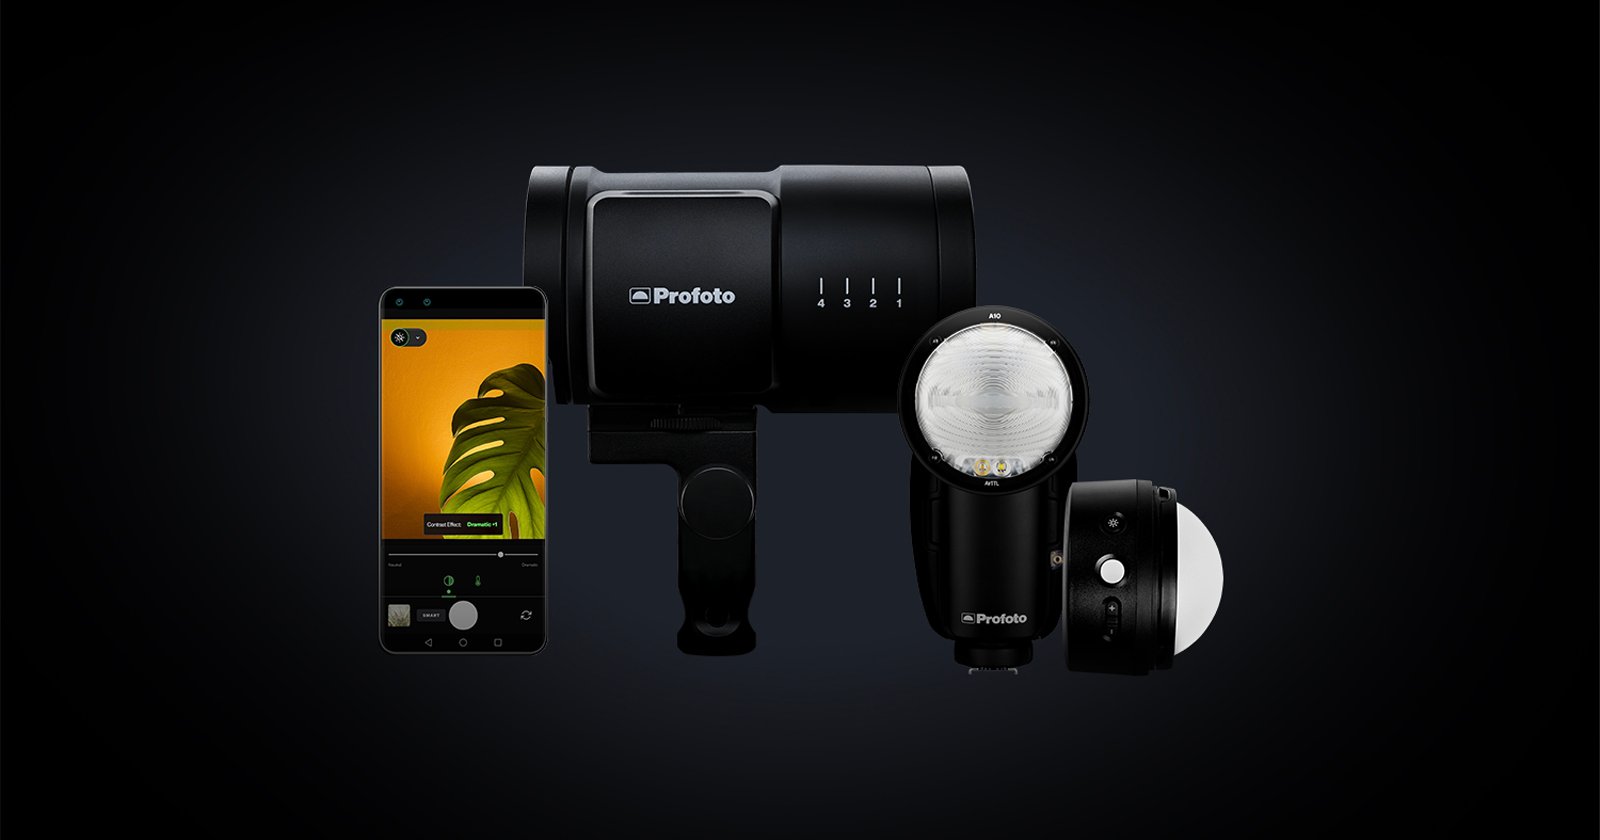 Android Smartphones Can Now Use Profoto Pro Flashes